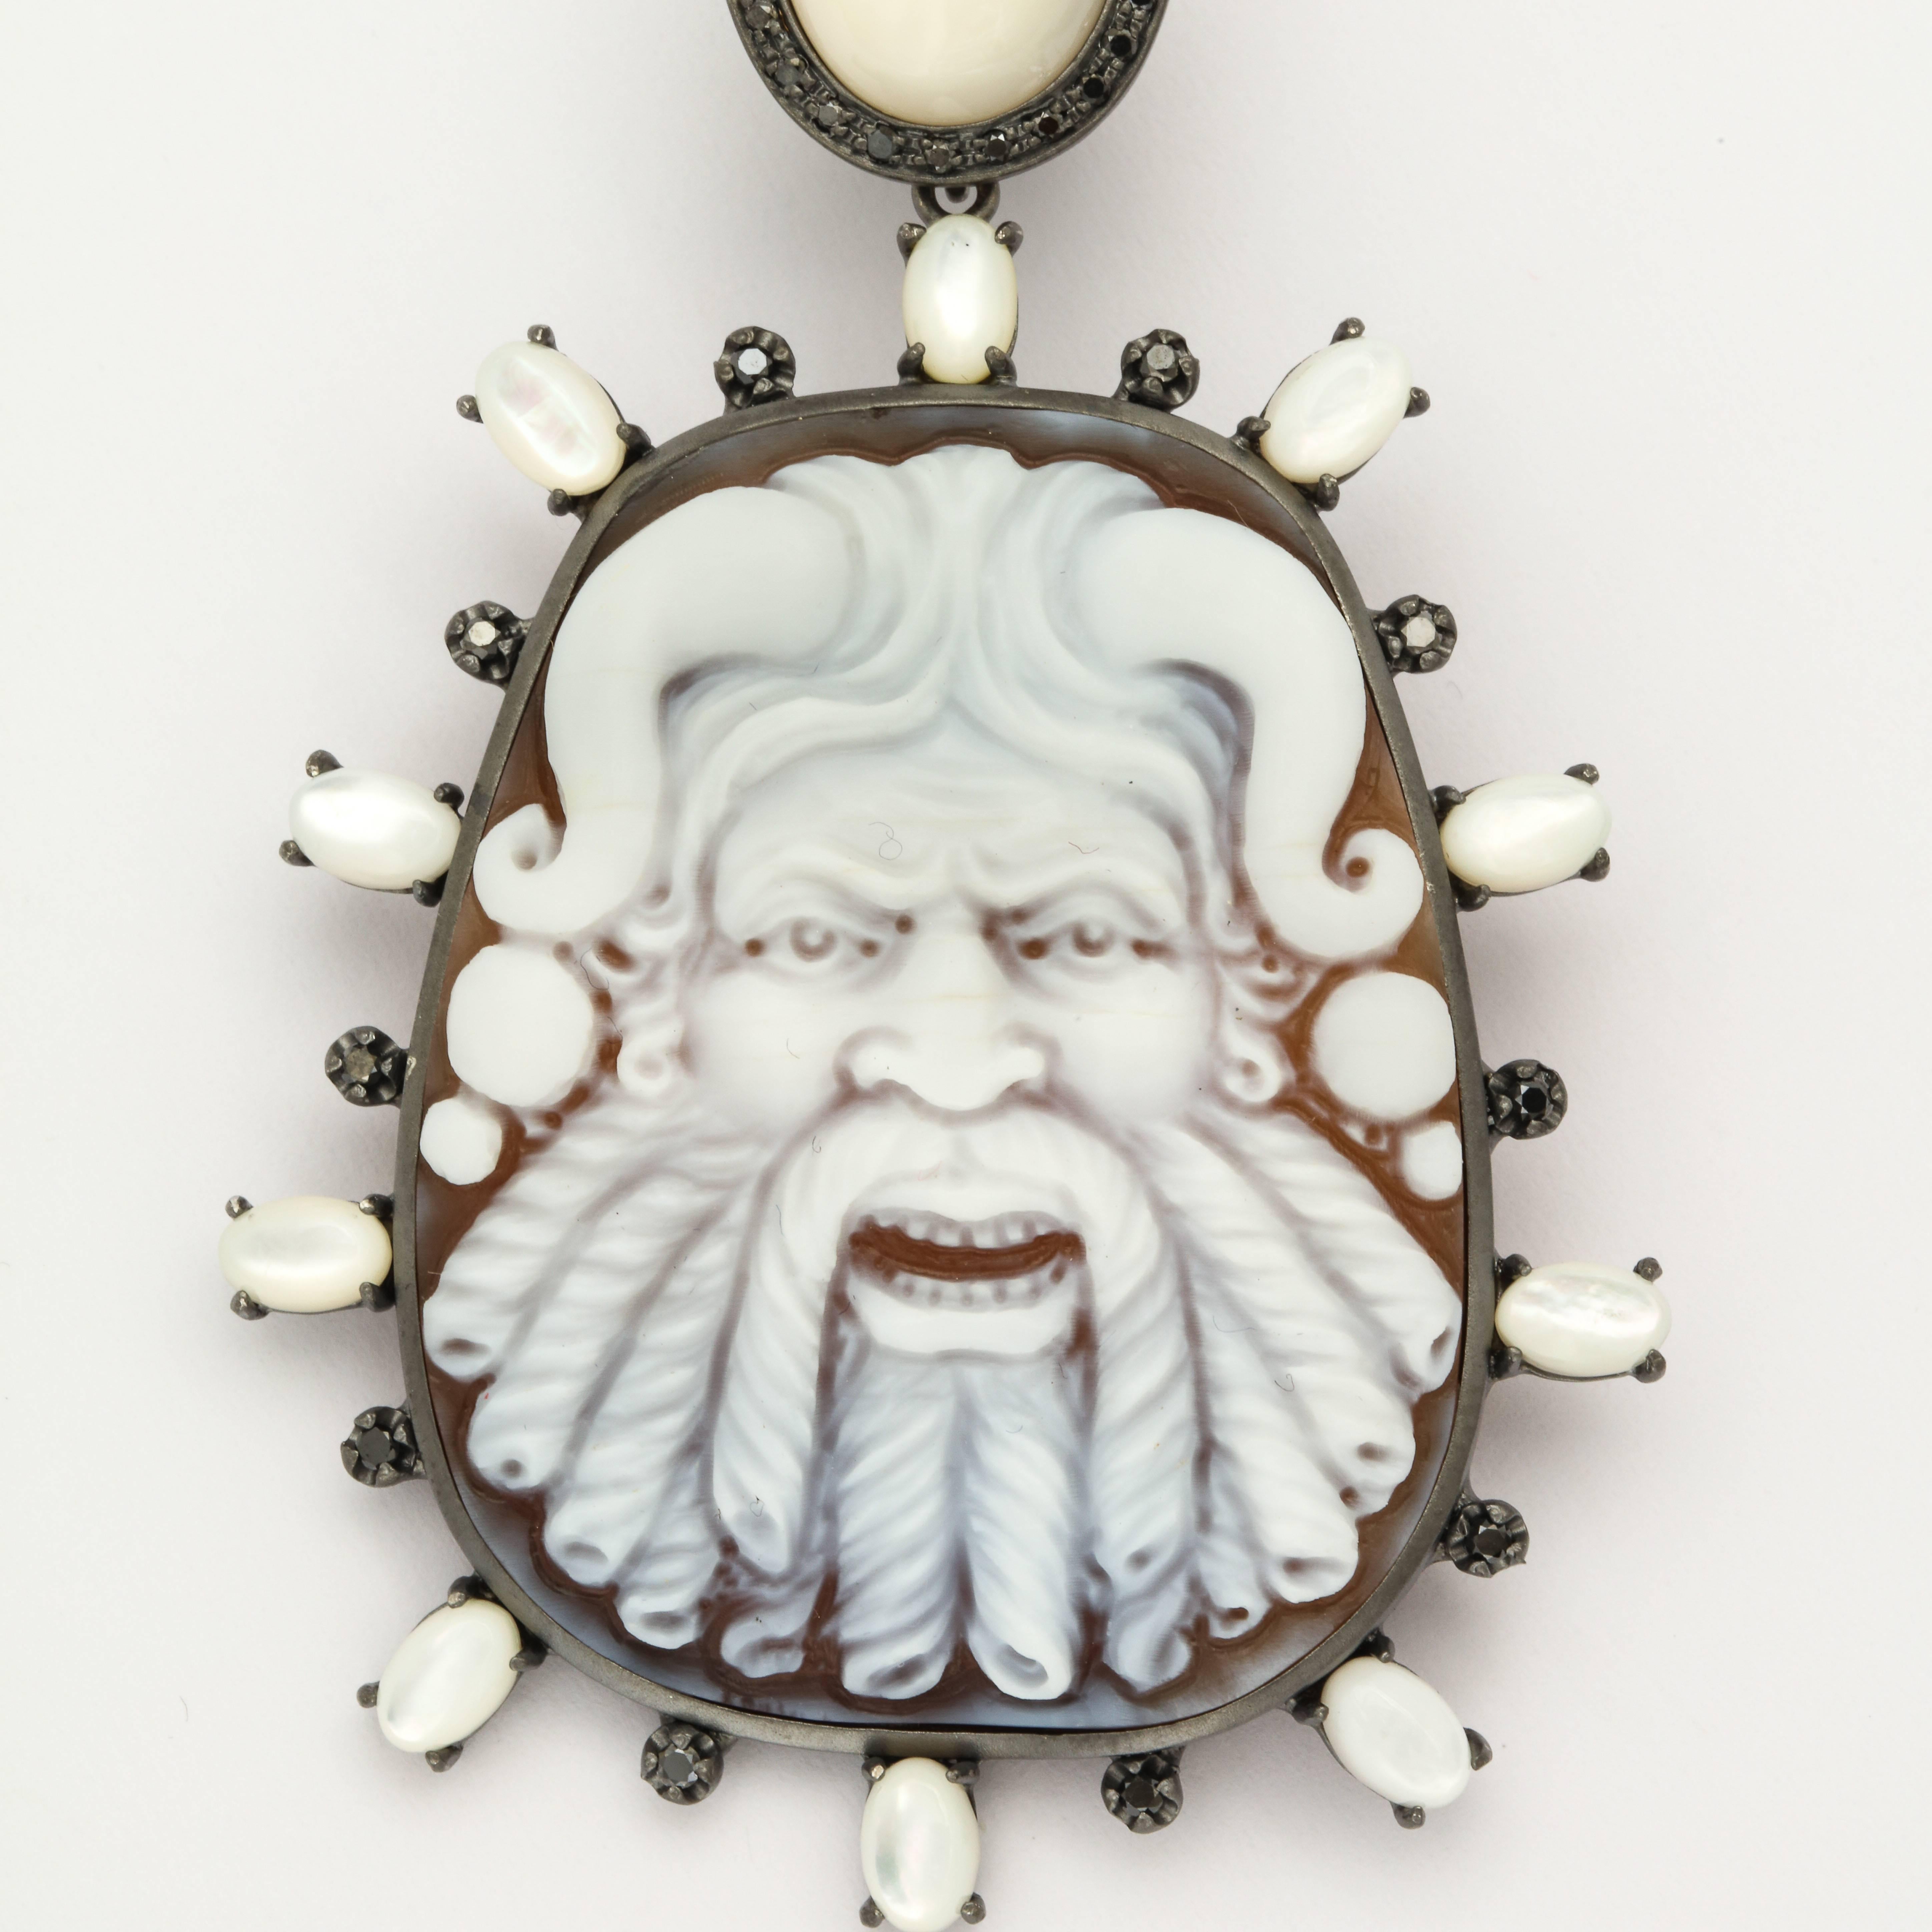 45mm sardonyx shell cameo hand-carved, set in sterling silver, black rhodium plated with 0.80ct black diamonds and mother-of-pearl stones.